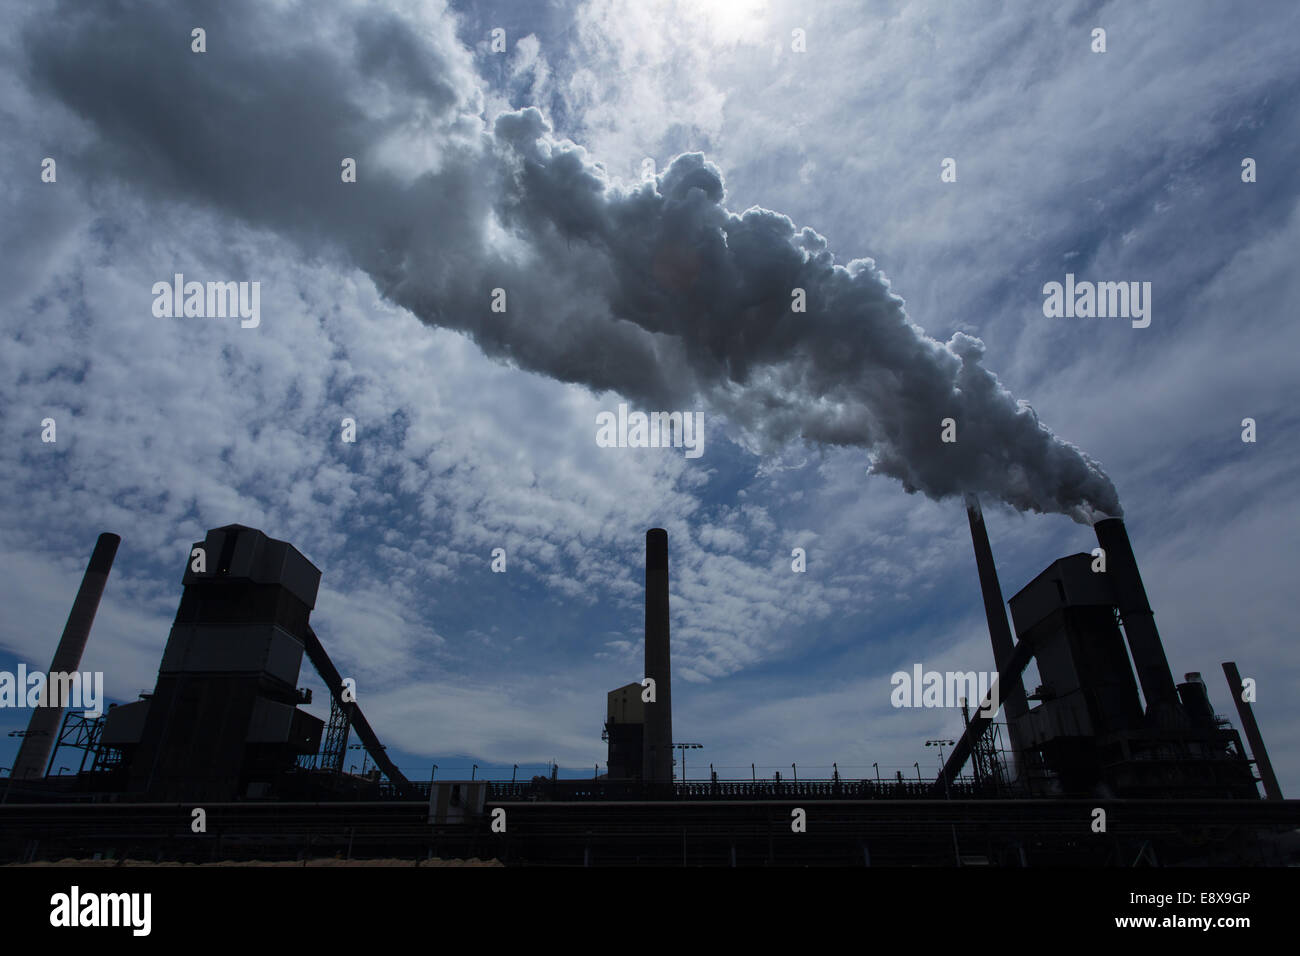 A steel mill in Australia emitting a plume of smoke or steam Stock Photo